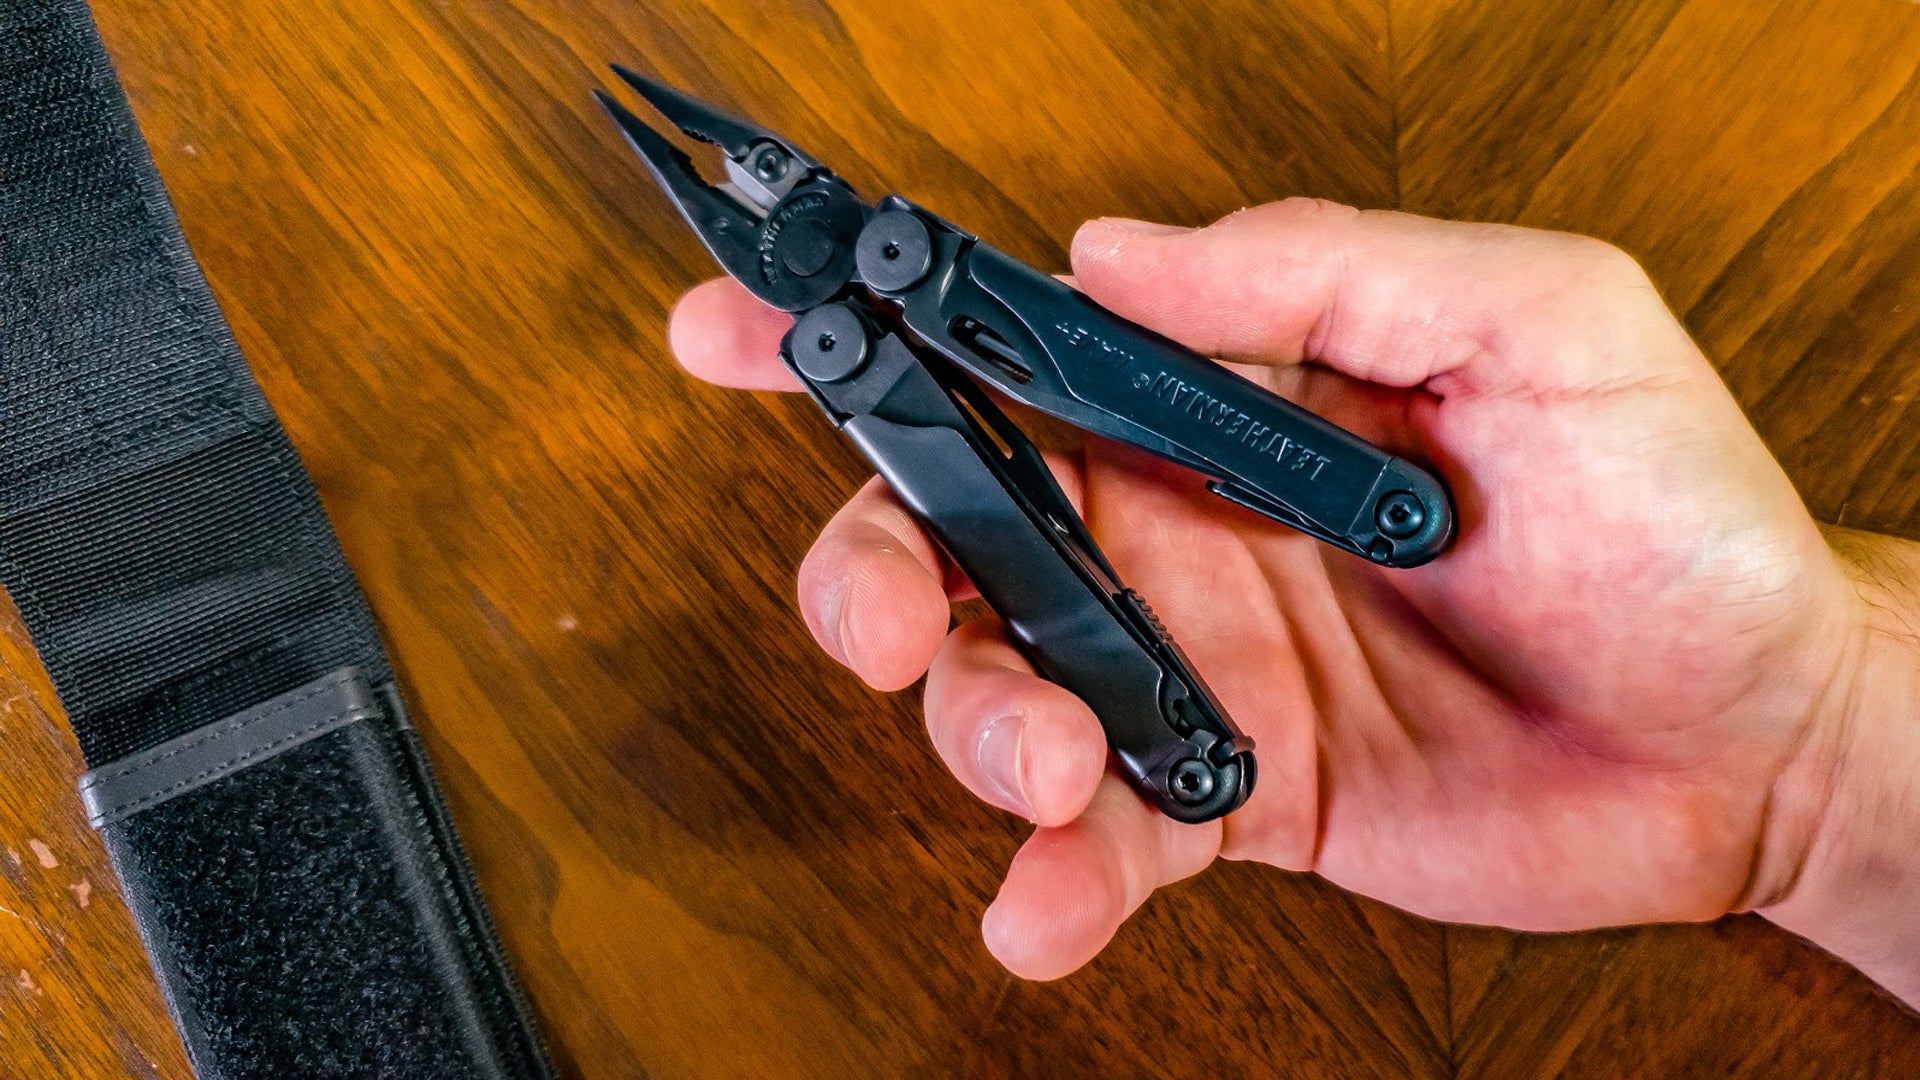 Leatherman Wave Plus Multitool Review